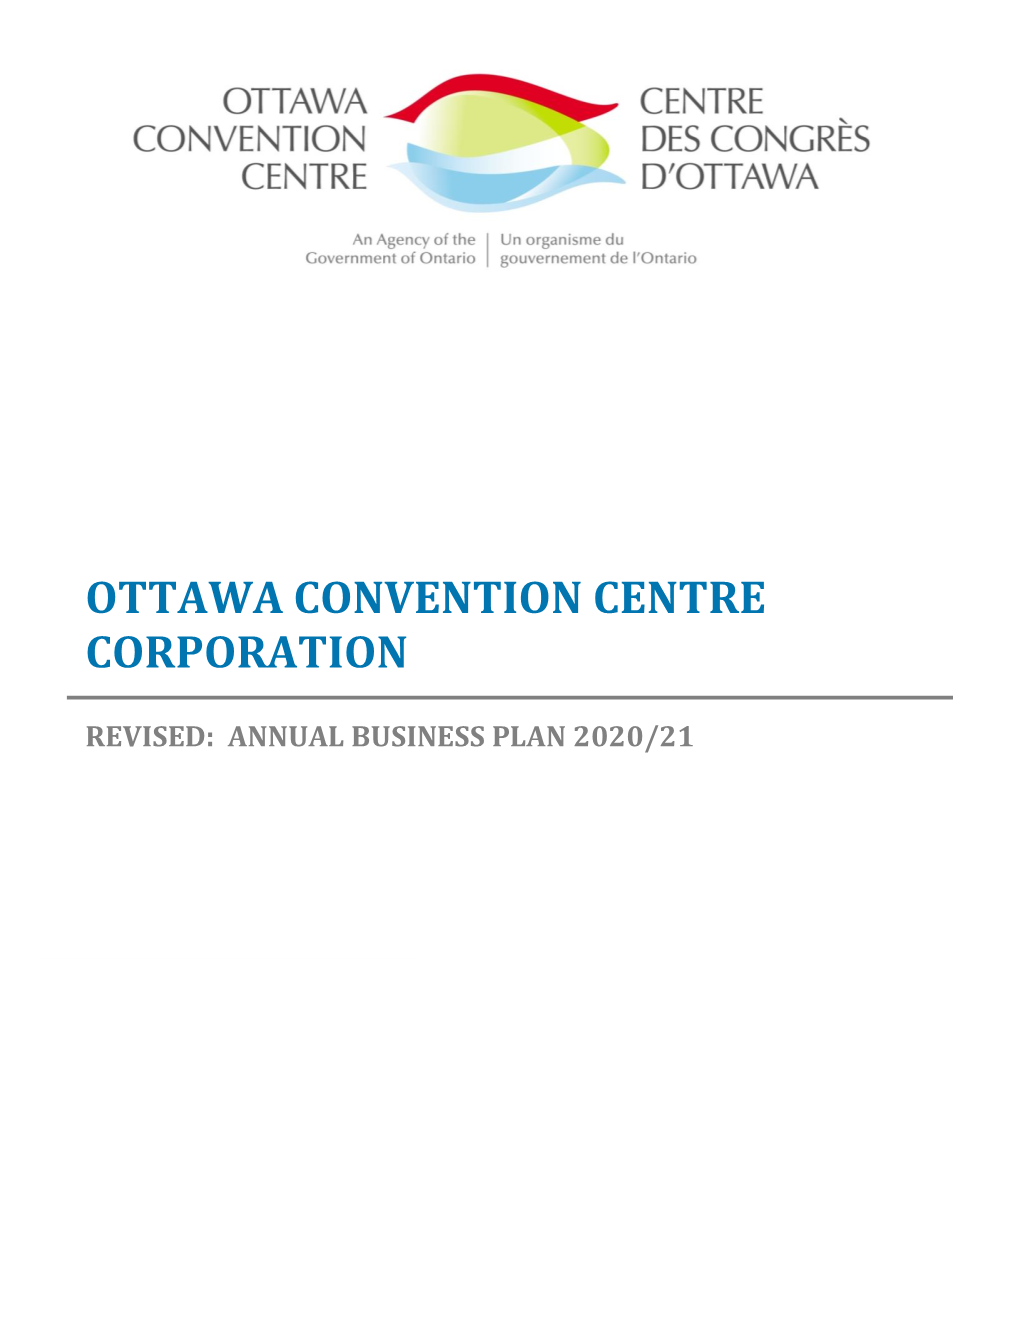 Ottawa Convention Centre Corporation Revised: Annual Business Plan 2020/21